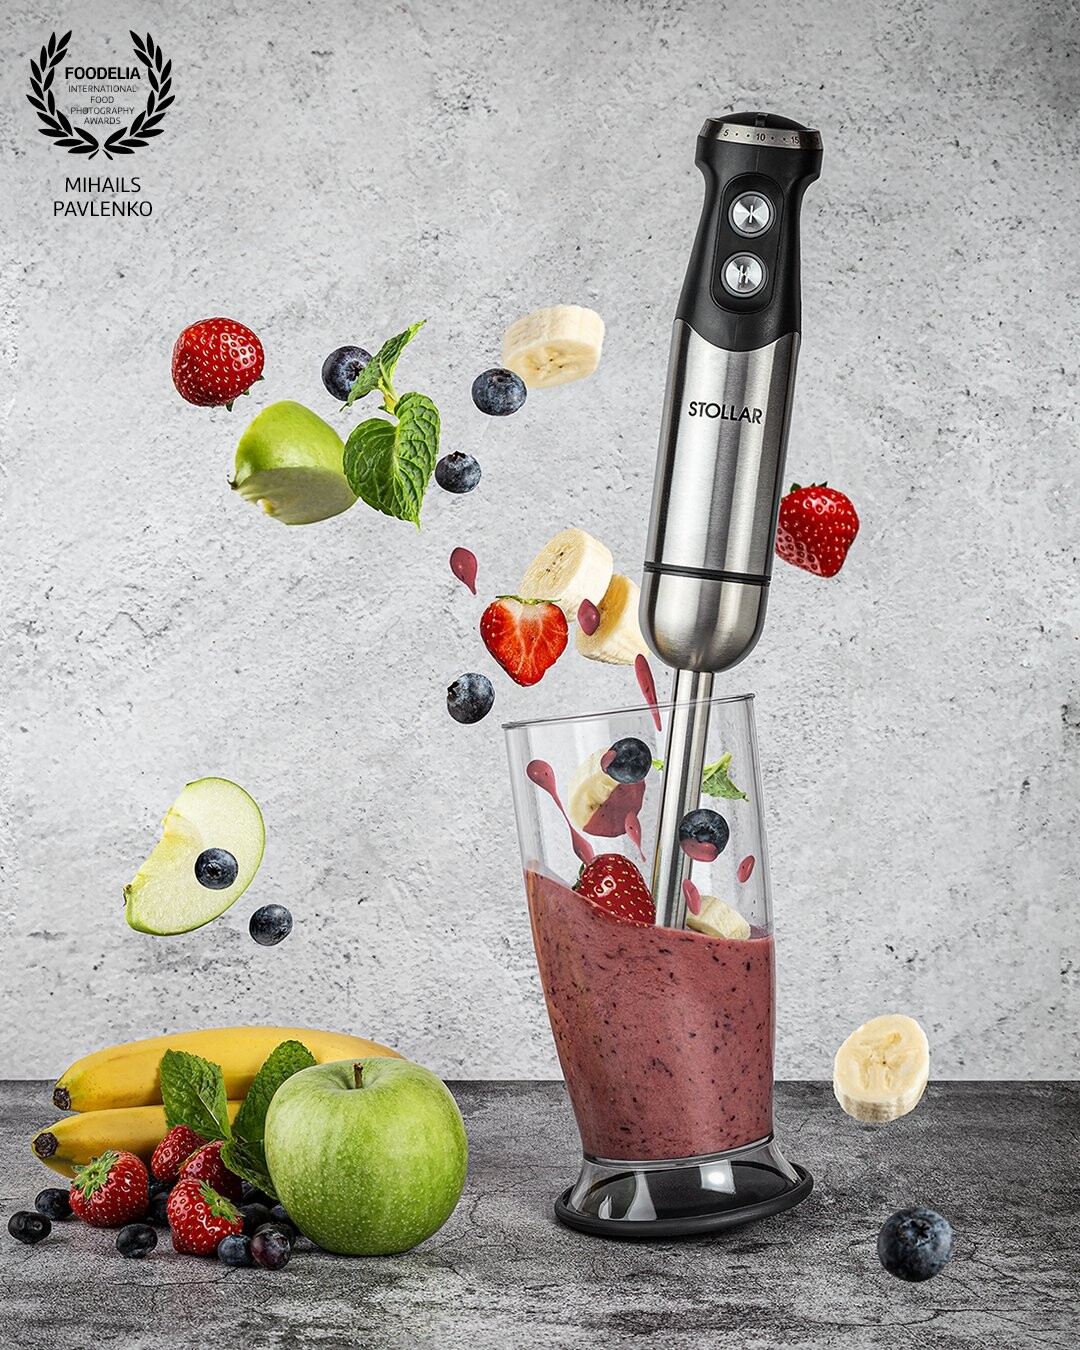 Photo shoot of Stollar hand blender ( @stollar_is_now_sage ) in process of smoothie making.  Smoothie recipe is simple when you choose only fresh berries and fruits.